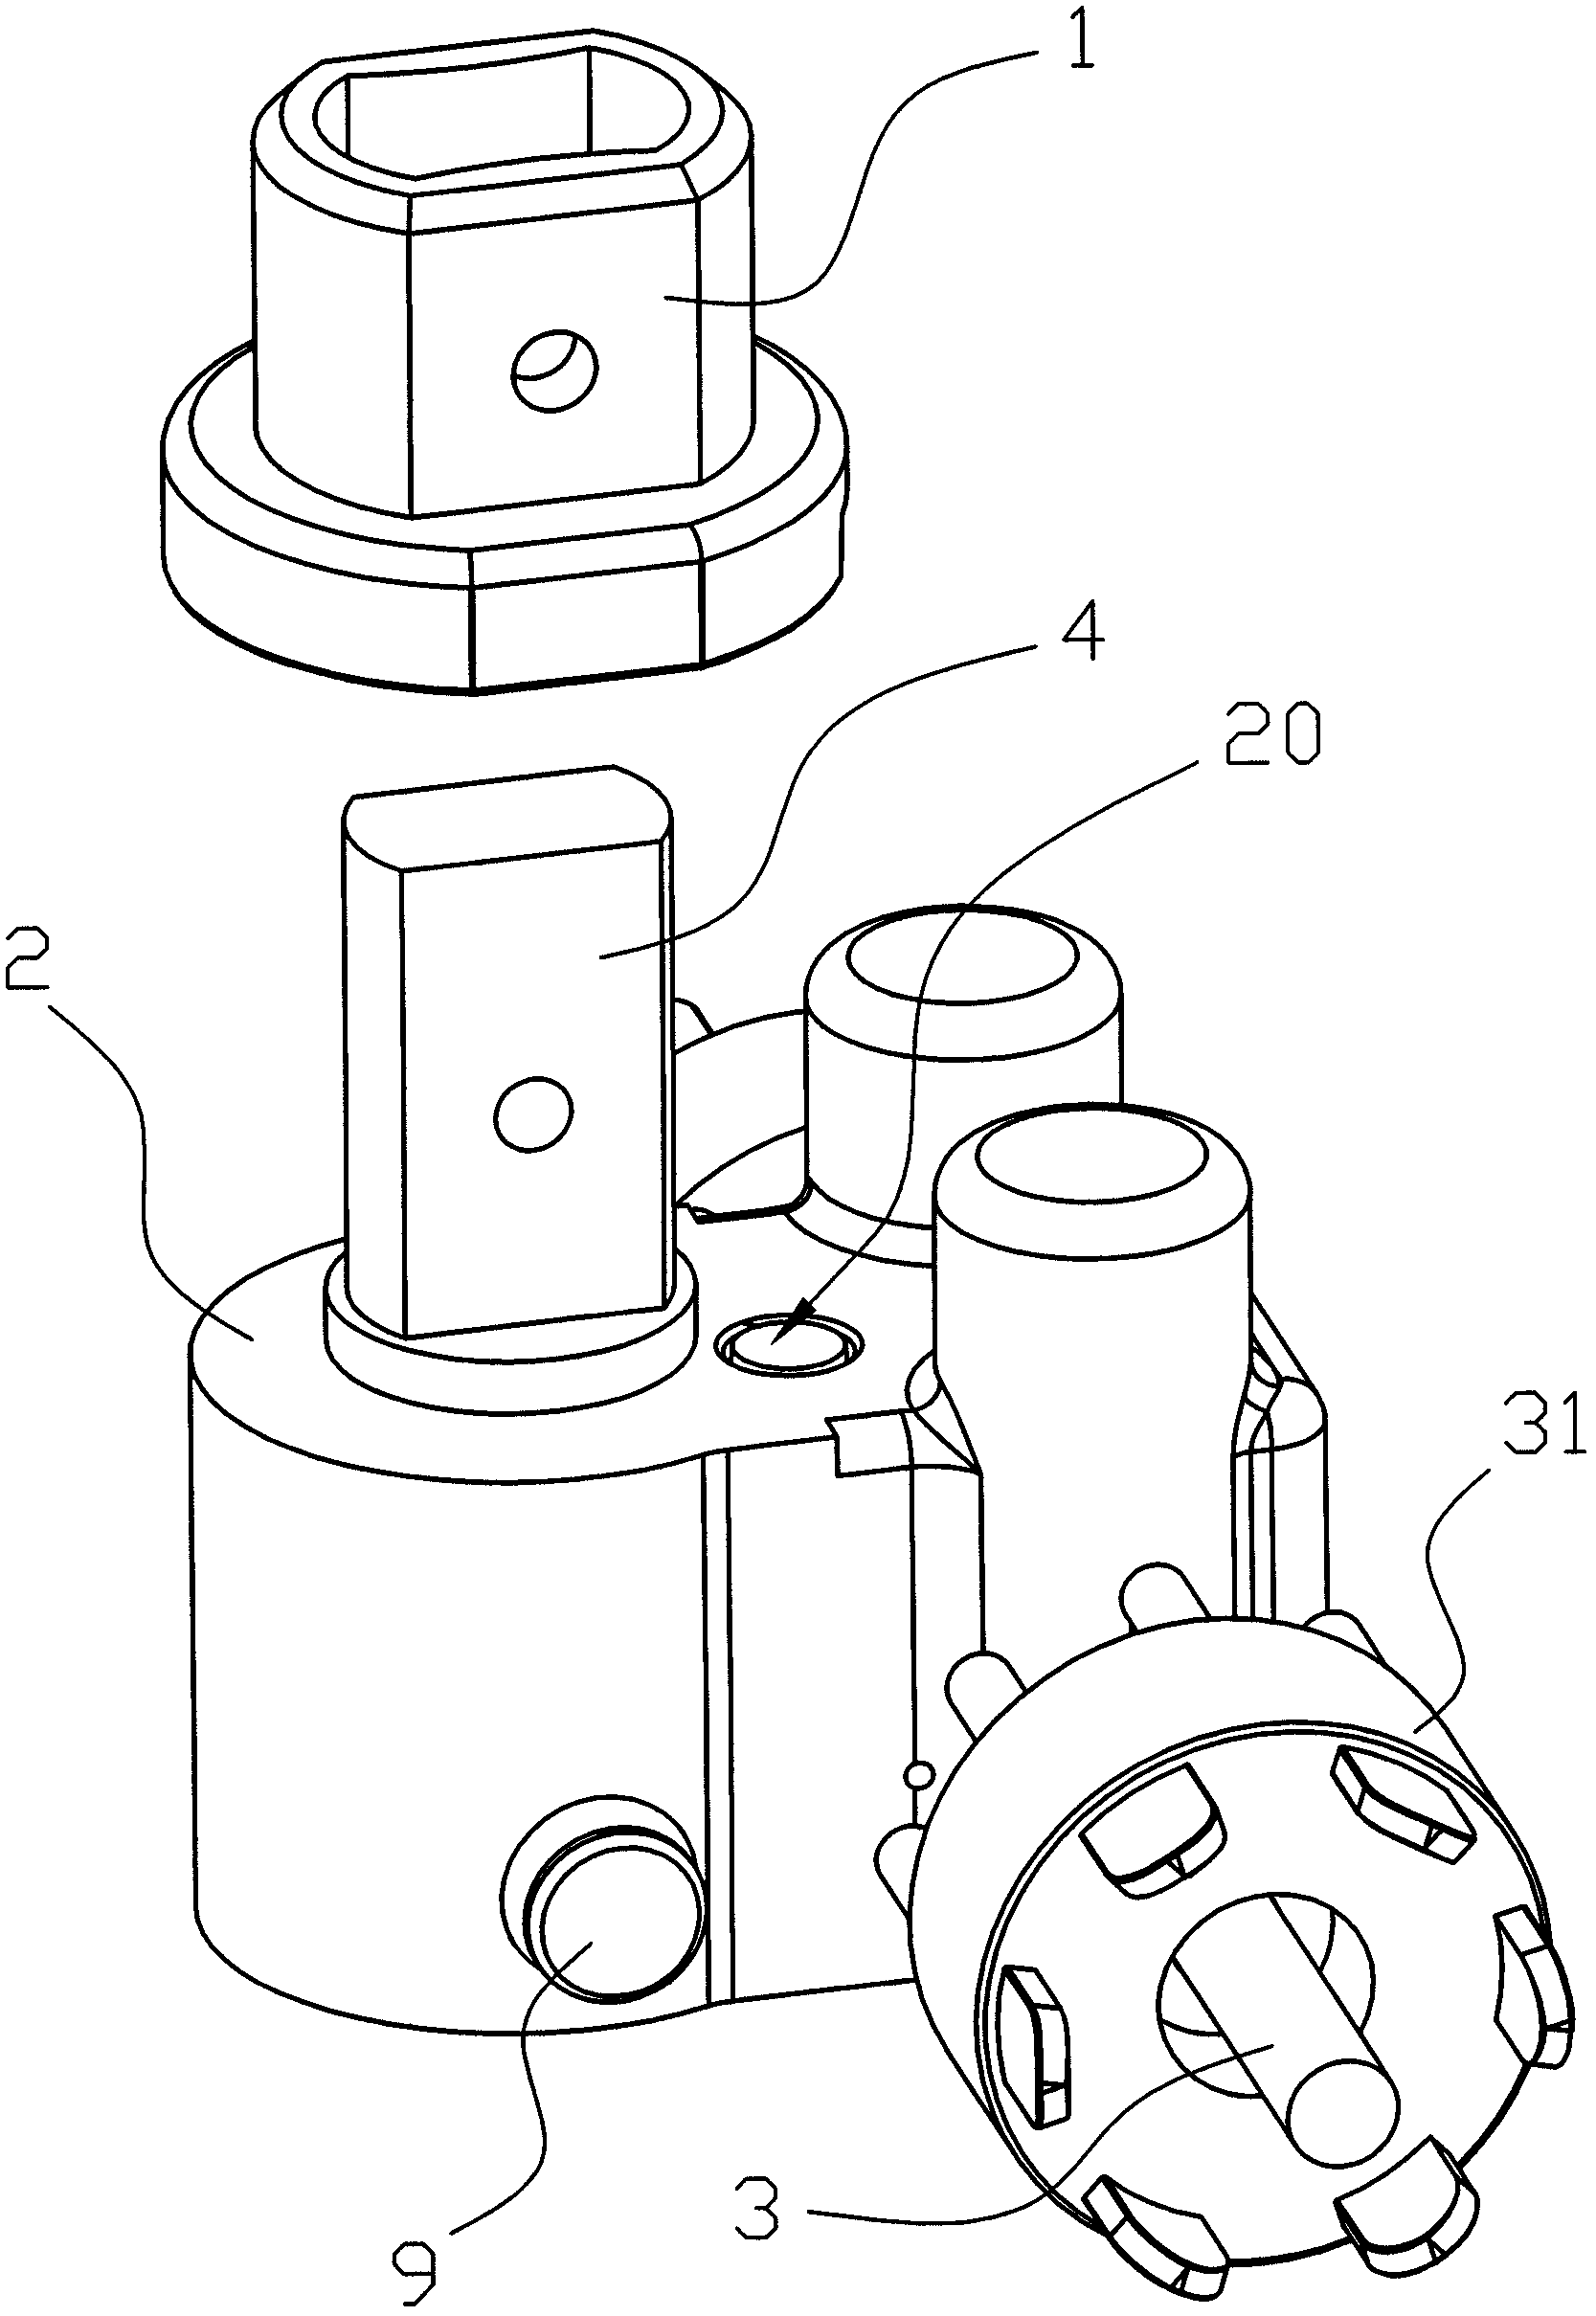 Automatic switching mechanism for universal movement and directional movement of cart wheels